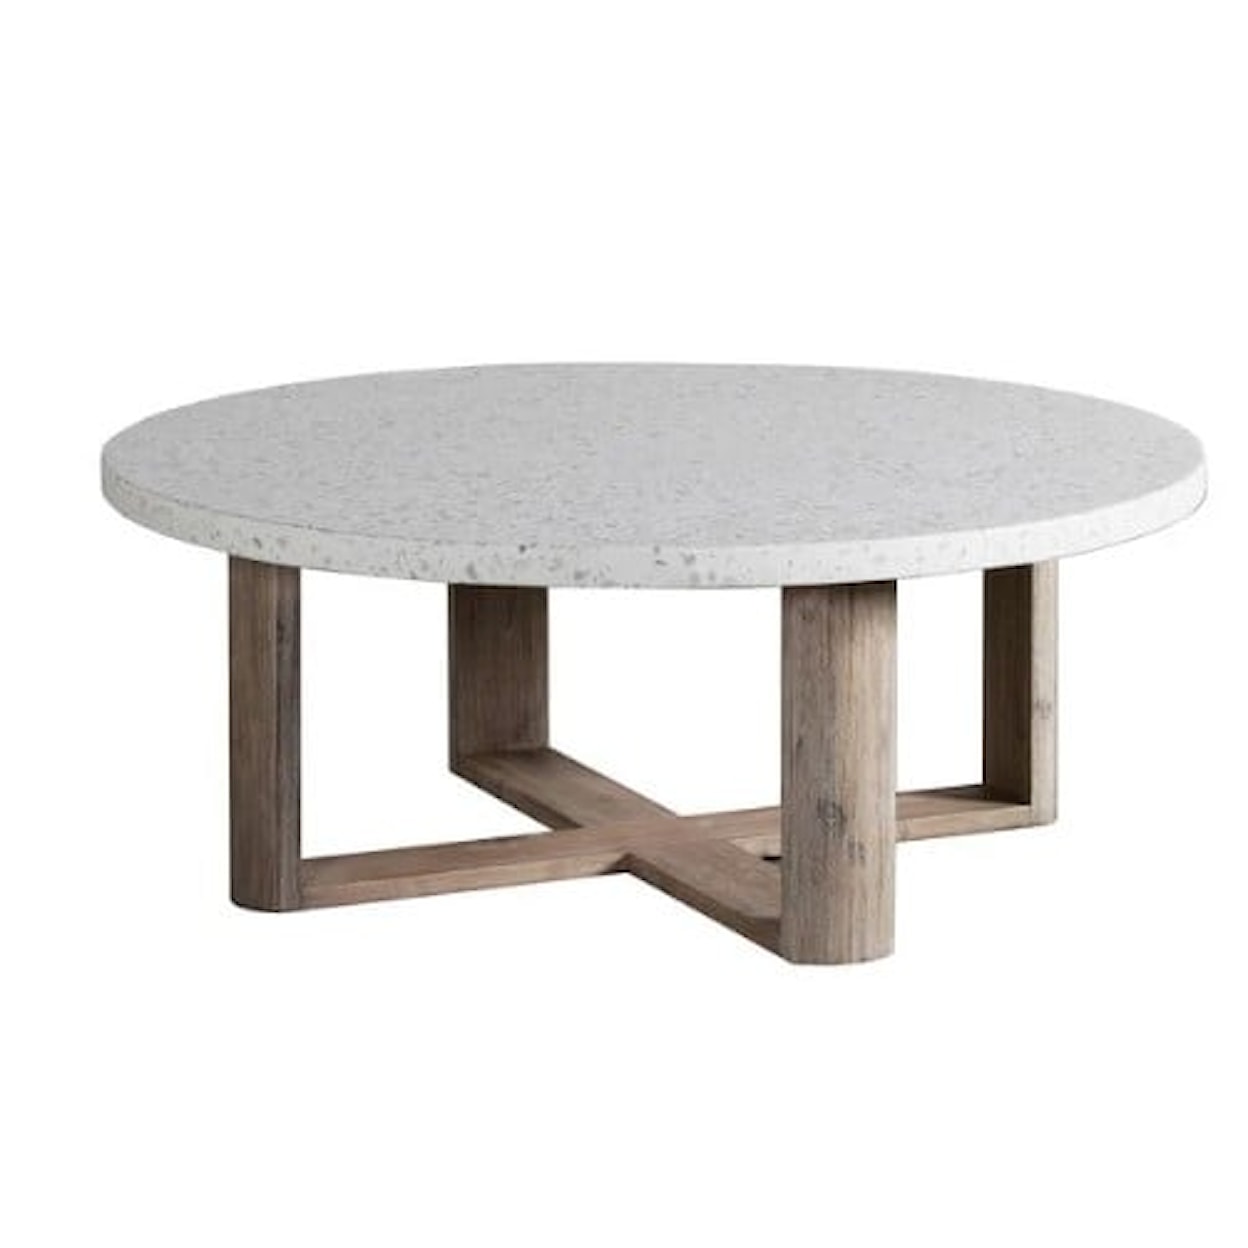 Dovetail Furniture Coffee Tables DURANO COFFEE TABLE